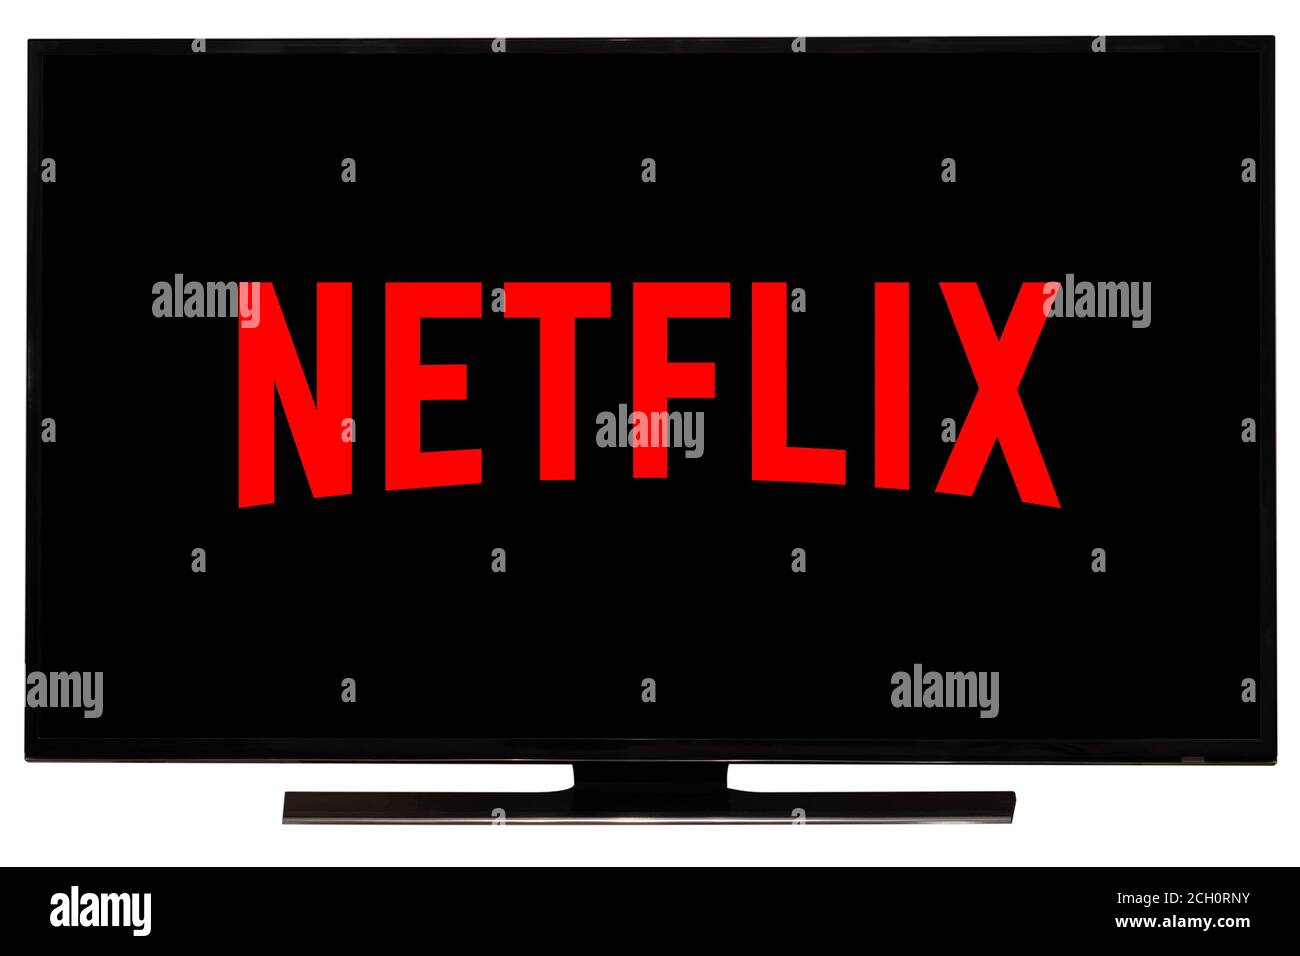 Netflix logo on TV screen. Netflix is a well known global provider of streaming movies and TV series Stock Photo